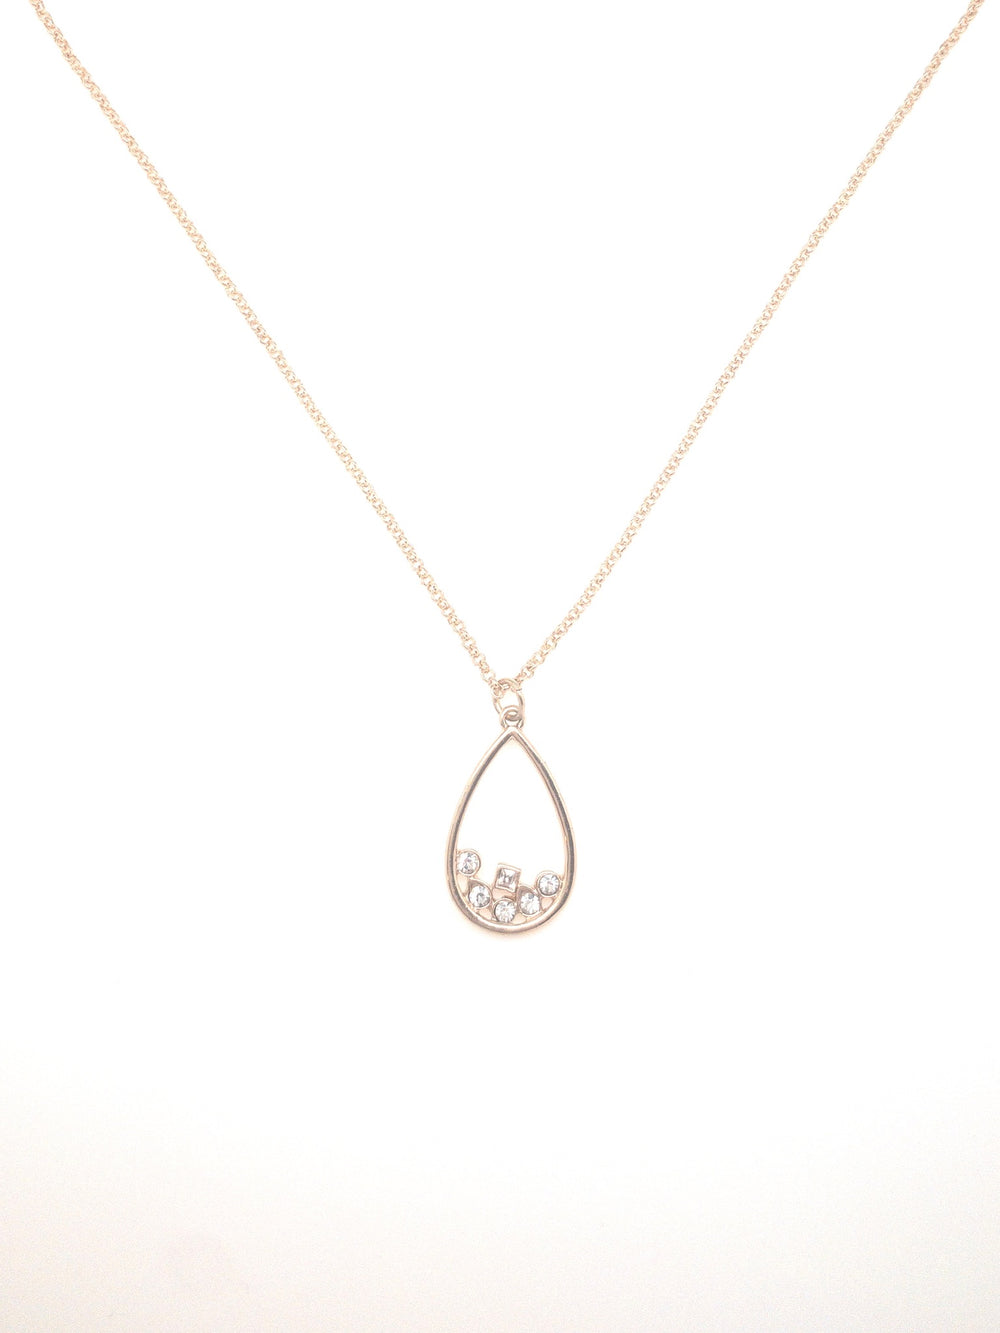 Rowan Drop shaped necklace in gold with tiny crystals inside